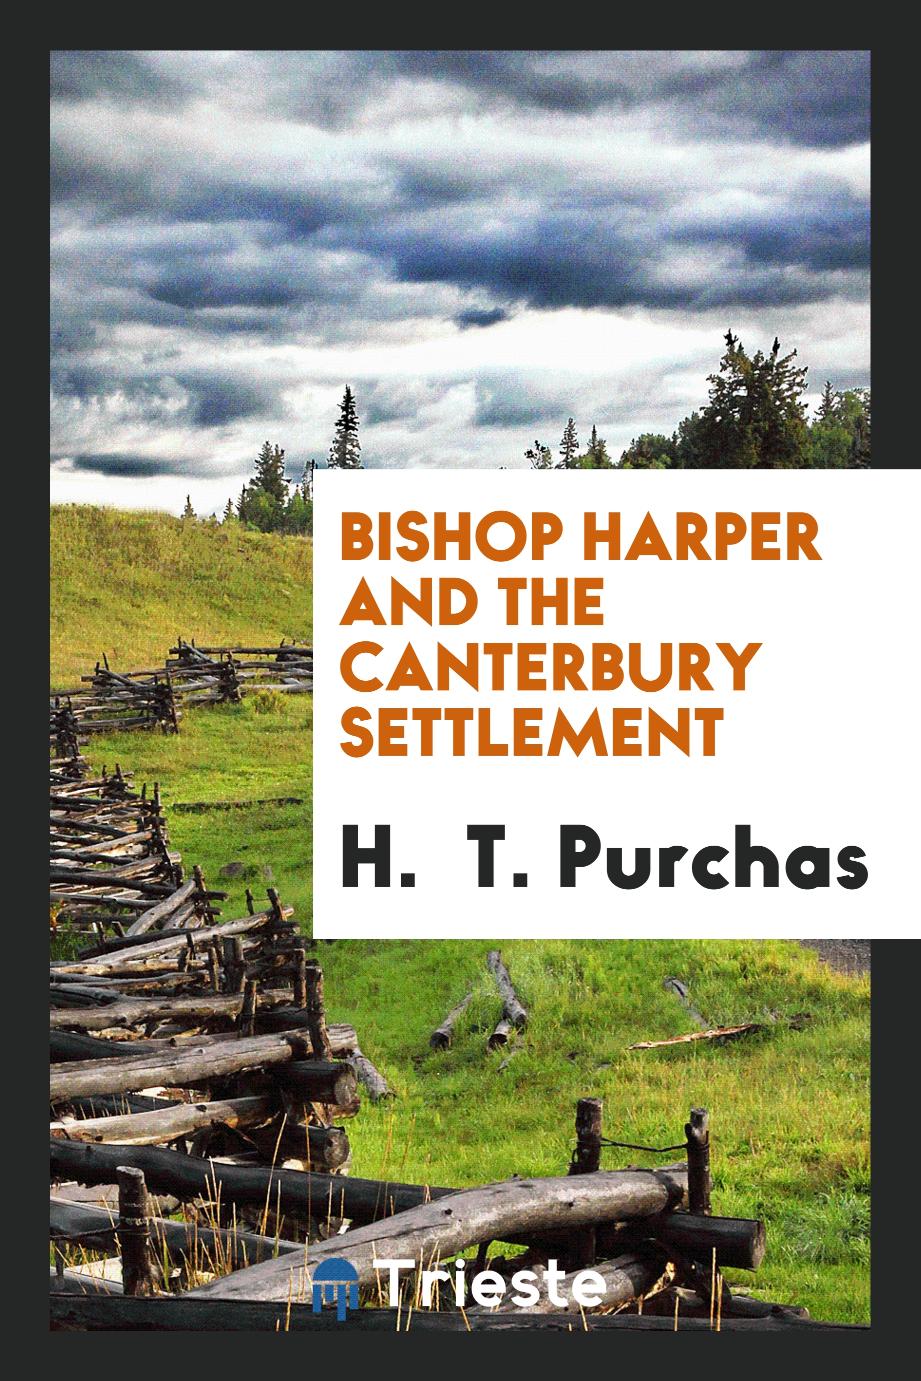 Bishop Harper and the Canterbury settlement